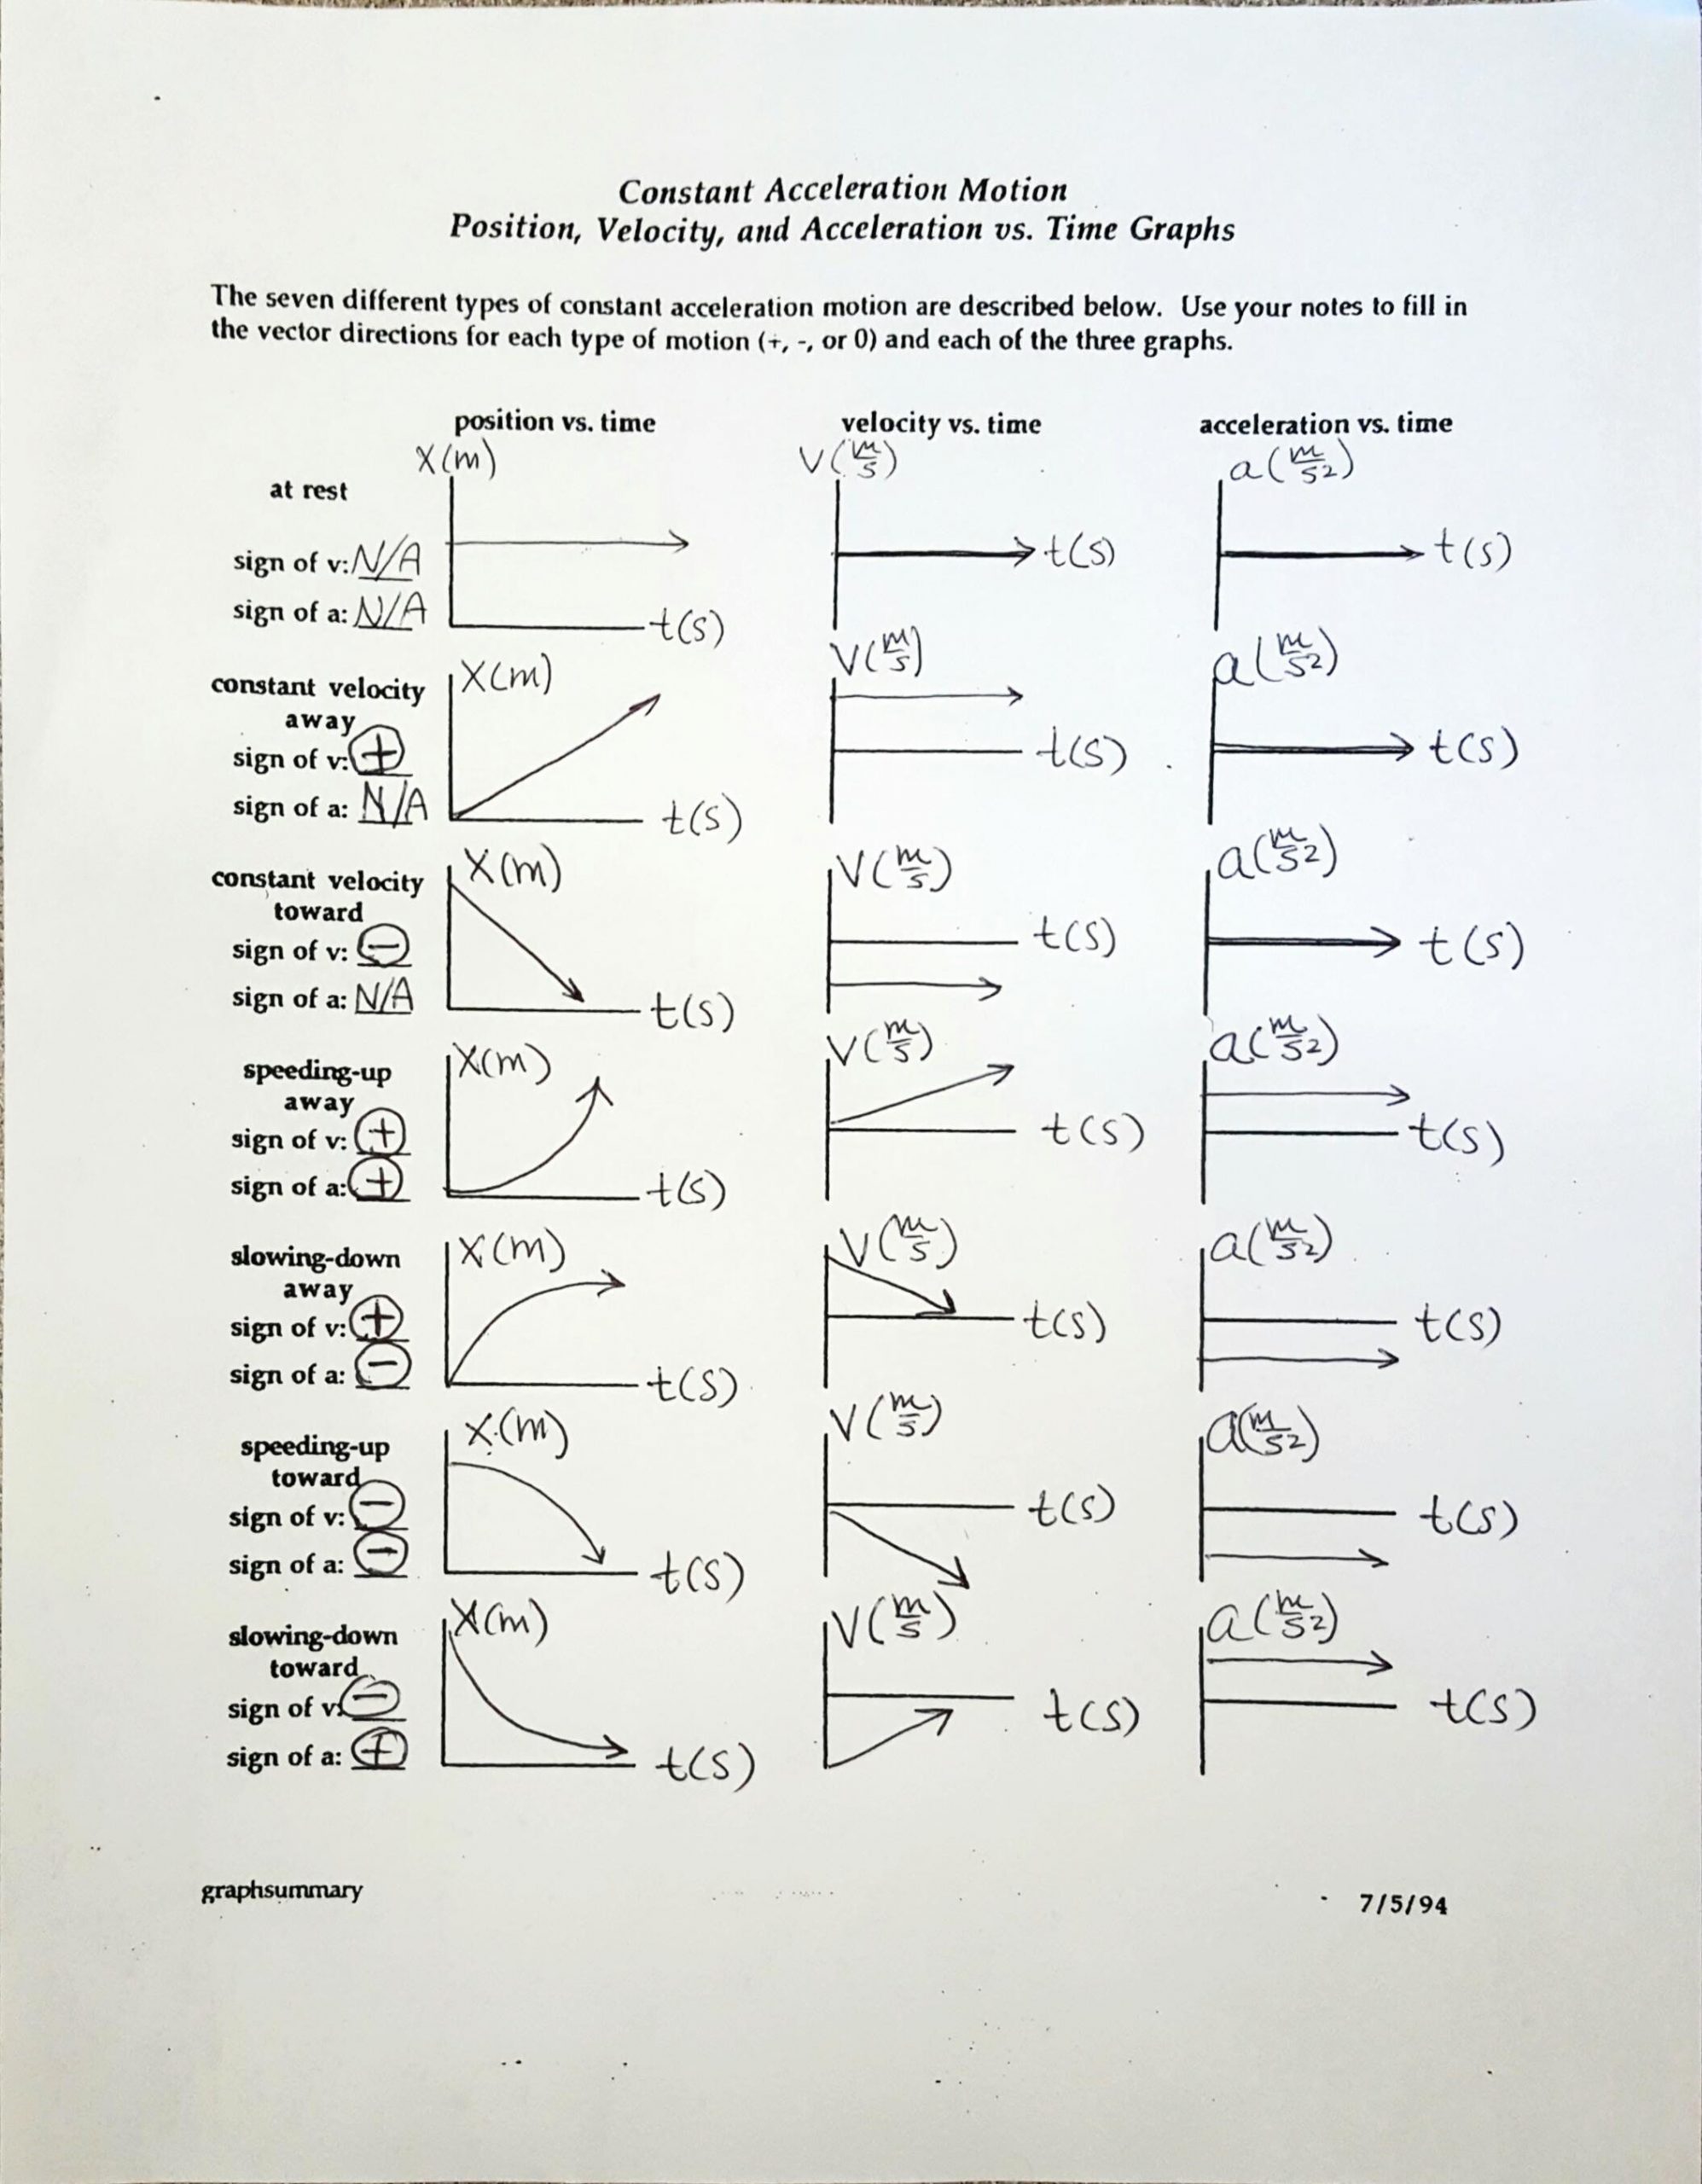 Distance Vs Time Graph Worksheet Position and Velocity Vs Time Graphs Worksheet Answers